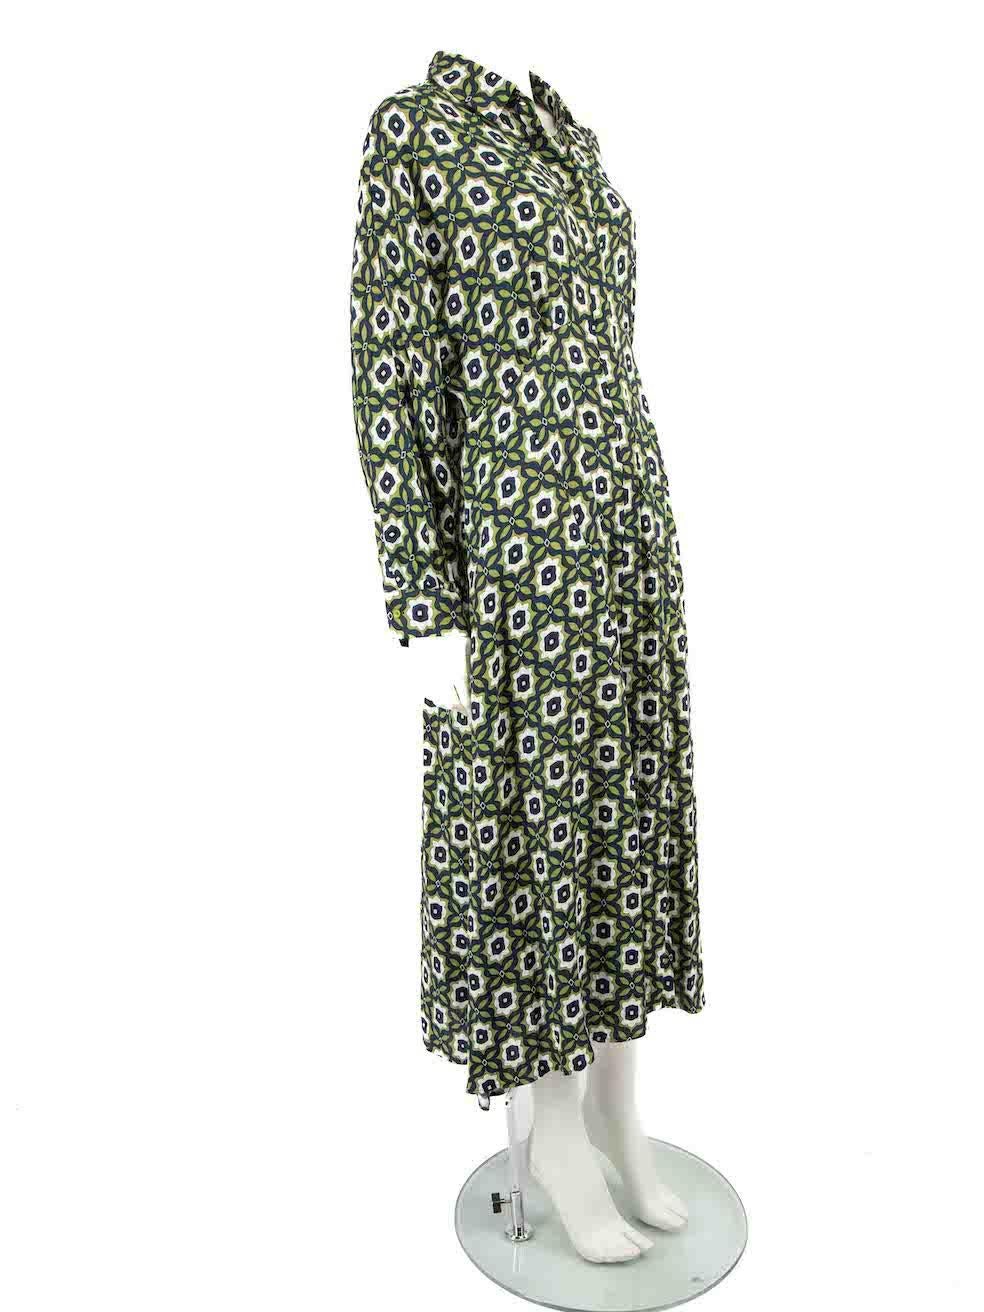 CONDITION is Very good. Hardly any visible wear to dress is evident on this used Max Mara Weekend designer resale item.
 
 
 
 Details
 
 
 Model: Tacco Day Dress
 
 Green
 
 Viscose
 
 Shirt dress
 
 Abstract floral pattern
 
 Midi
 
 Button up